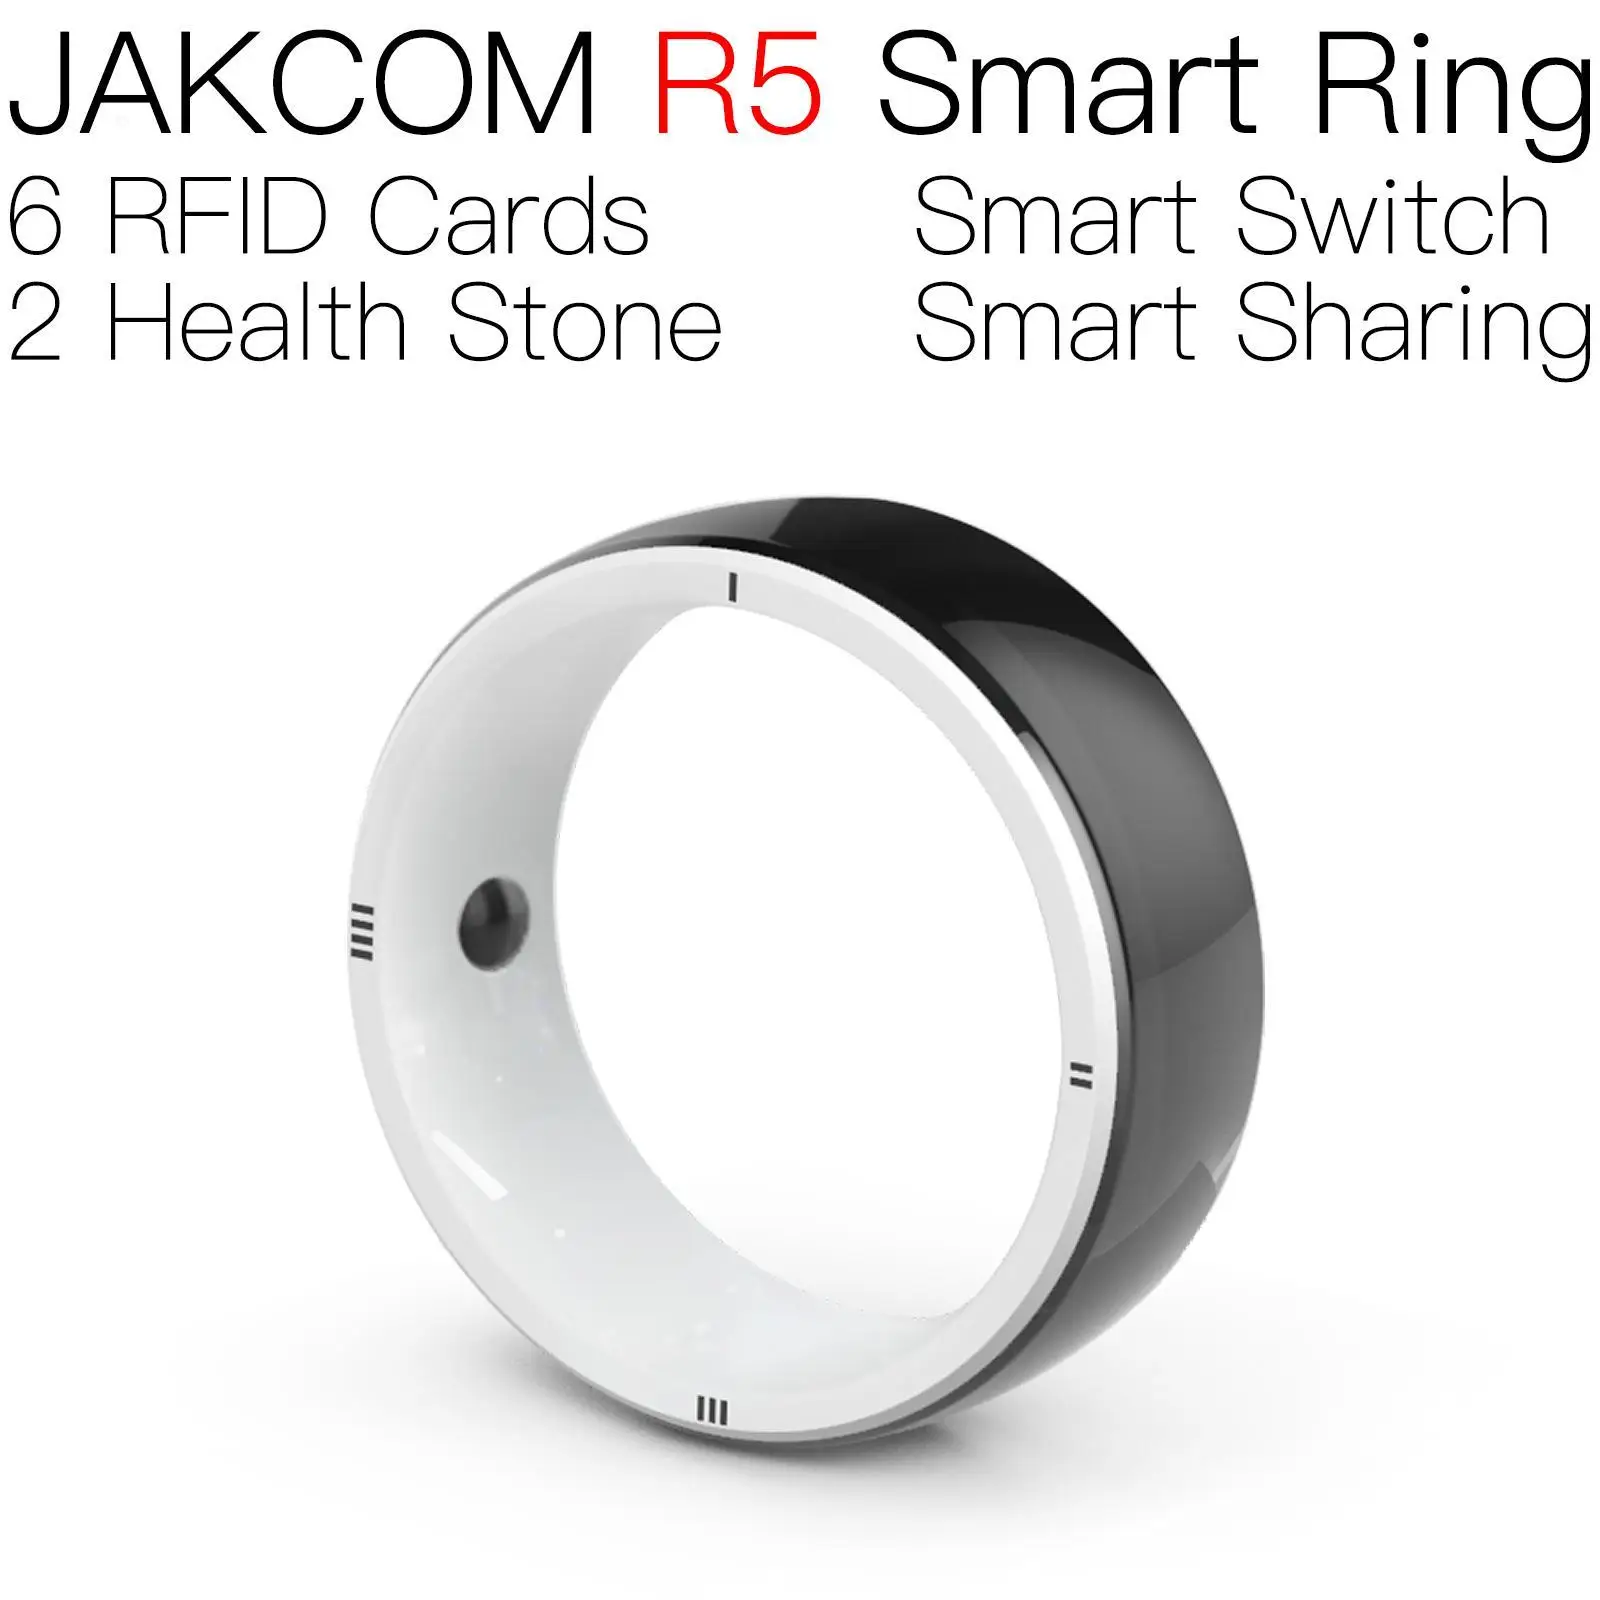 

JAKCOM R5 Smart Ring better than em4305 t5577 125khz copy rewritable writable nfc cards business card with chip cow rfid ear